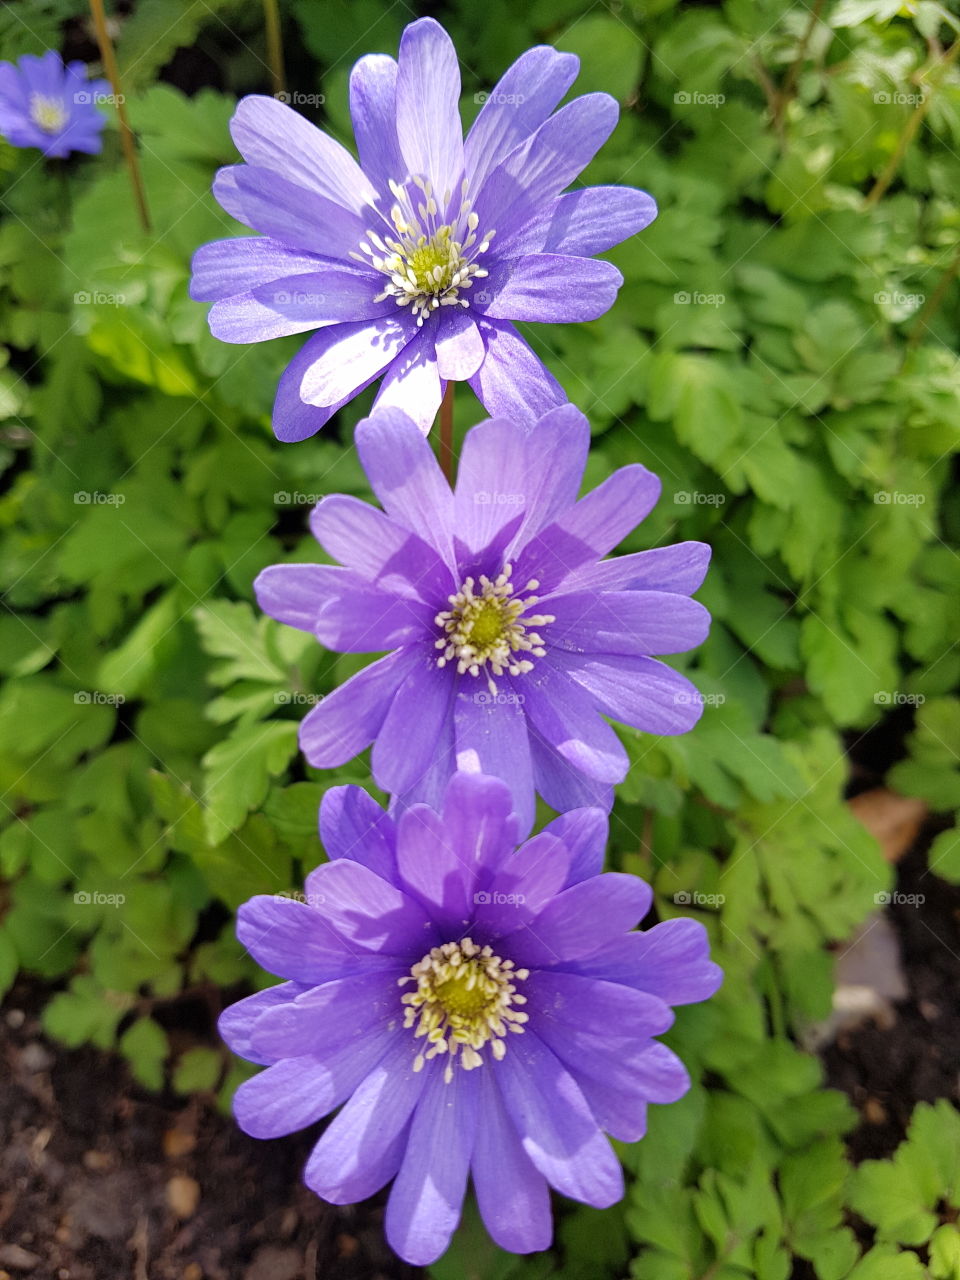 Purple Flowers Surrounded by Green Leaves